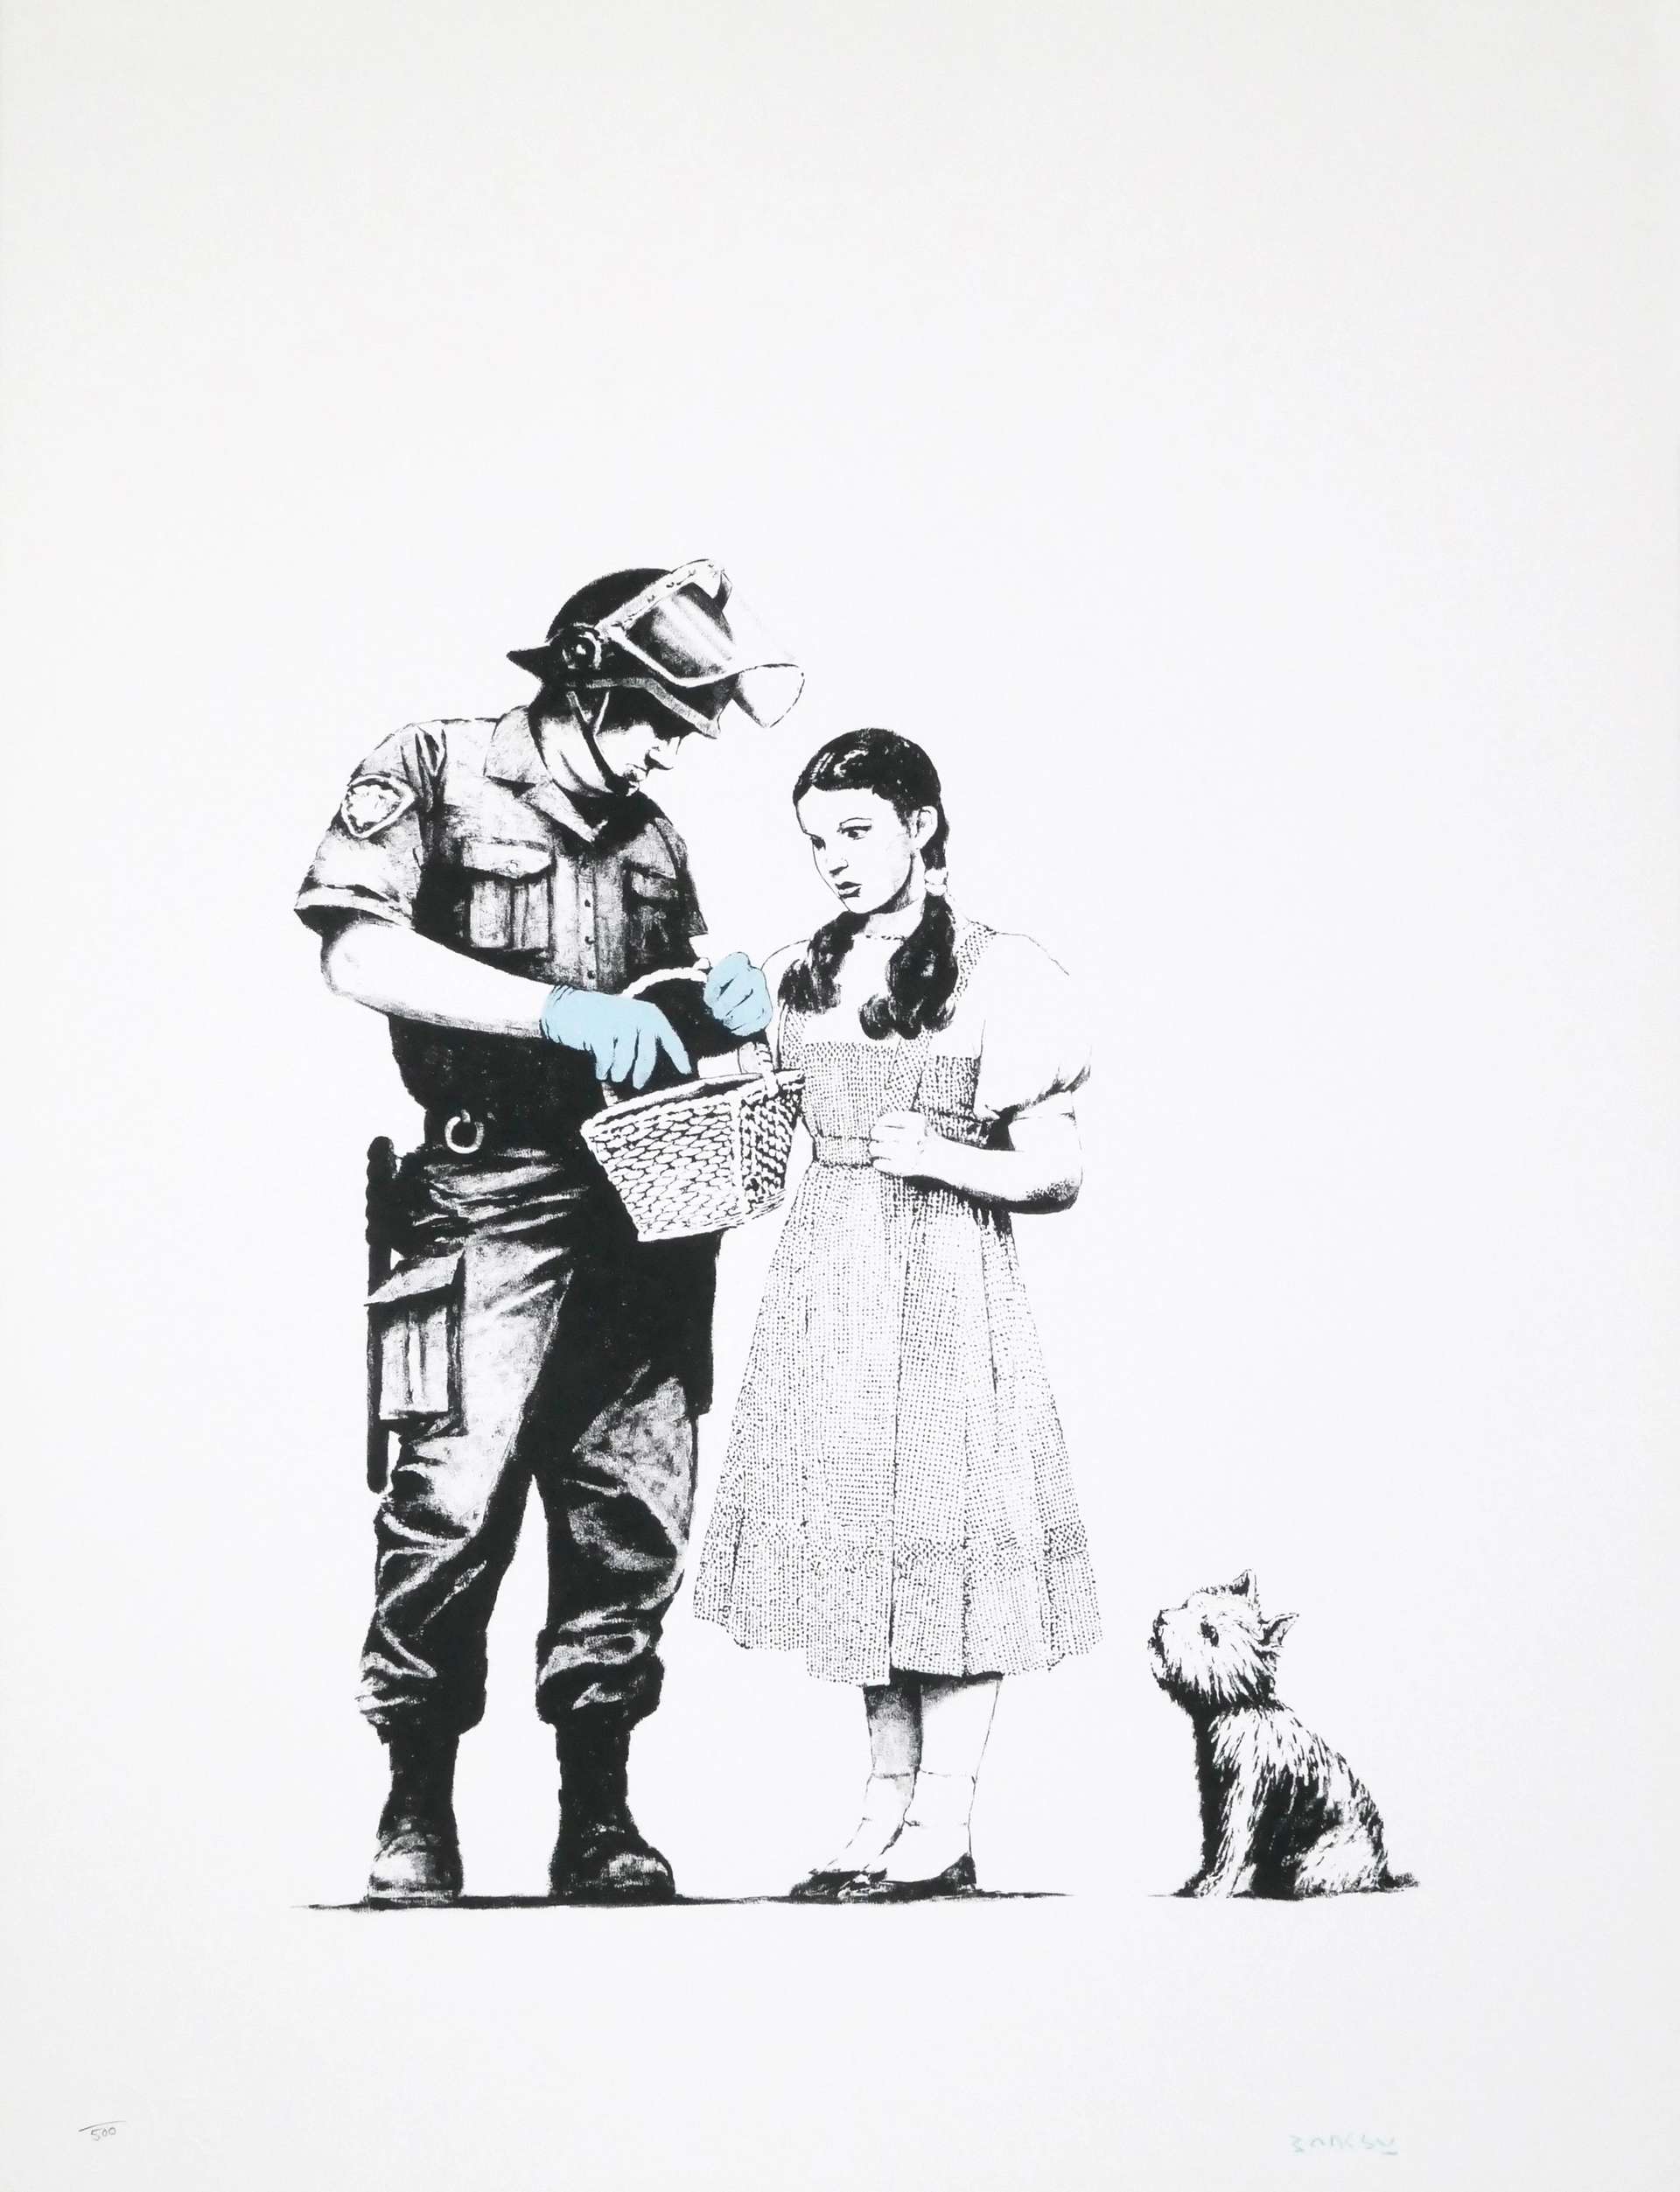 Banksy's 2007 Stop And Search, a signed screen print of 500, satirizes the UK government's stop-and-search policy by depicting a modern-day policeman searching Dorothy from the Wizard of Oz. 